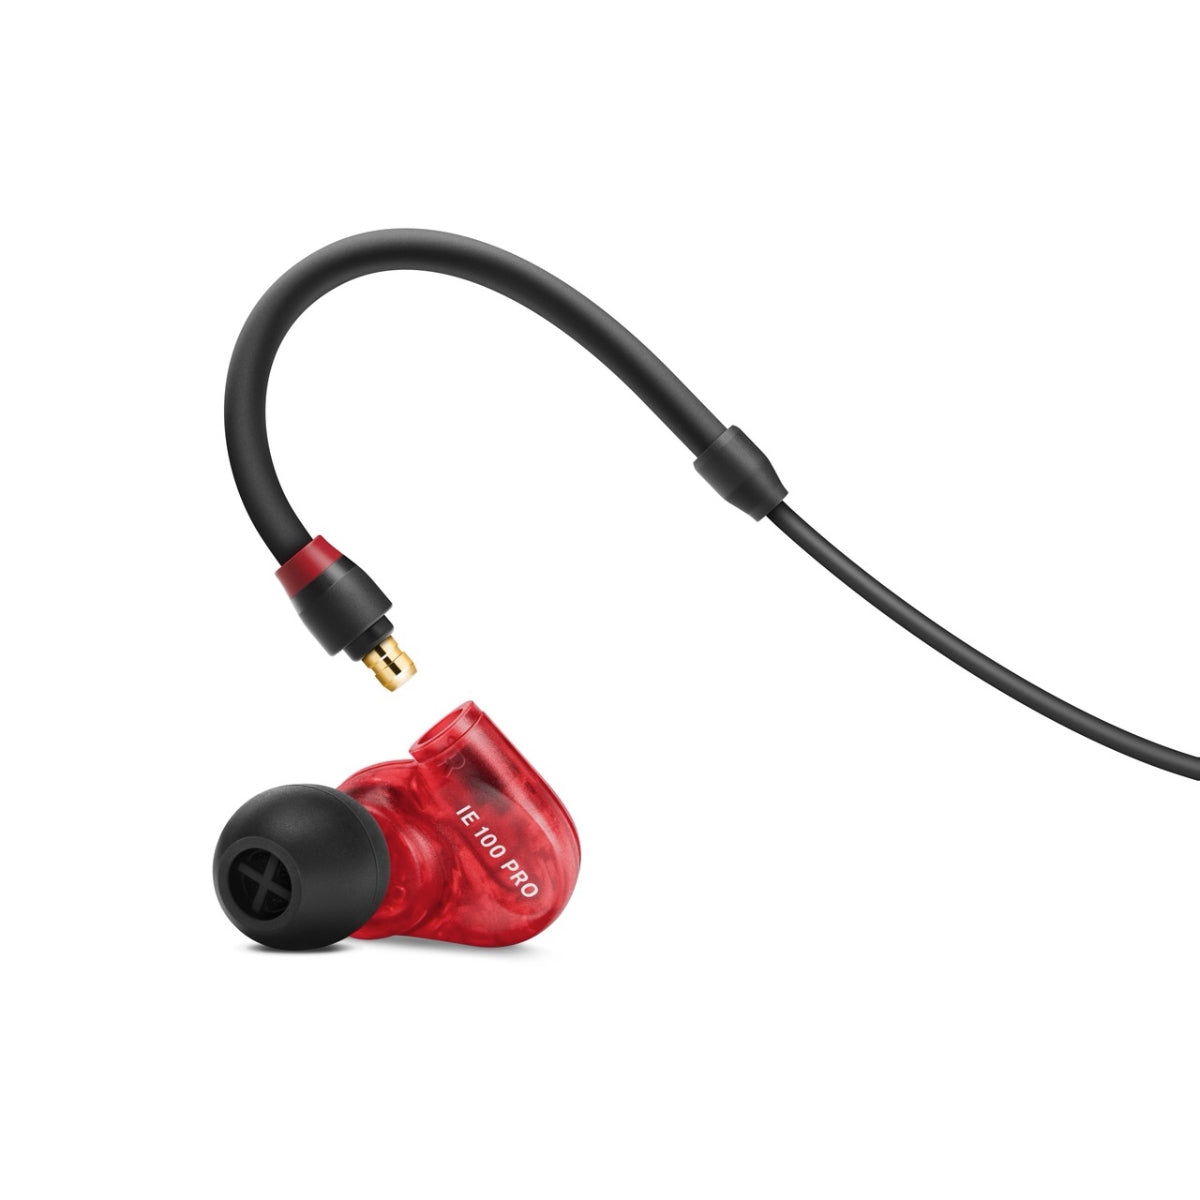 Sennheiser IE 100 PRO Red In-ear Headset, 1.3m Cable, Soft Pouch, Ear Adapters (S/M/L)